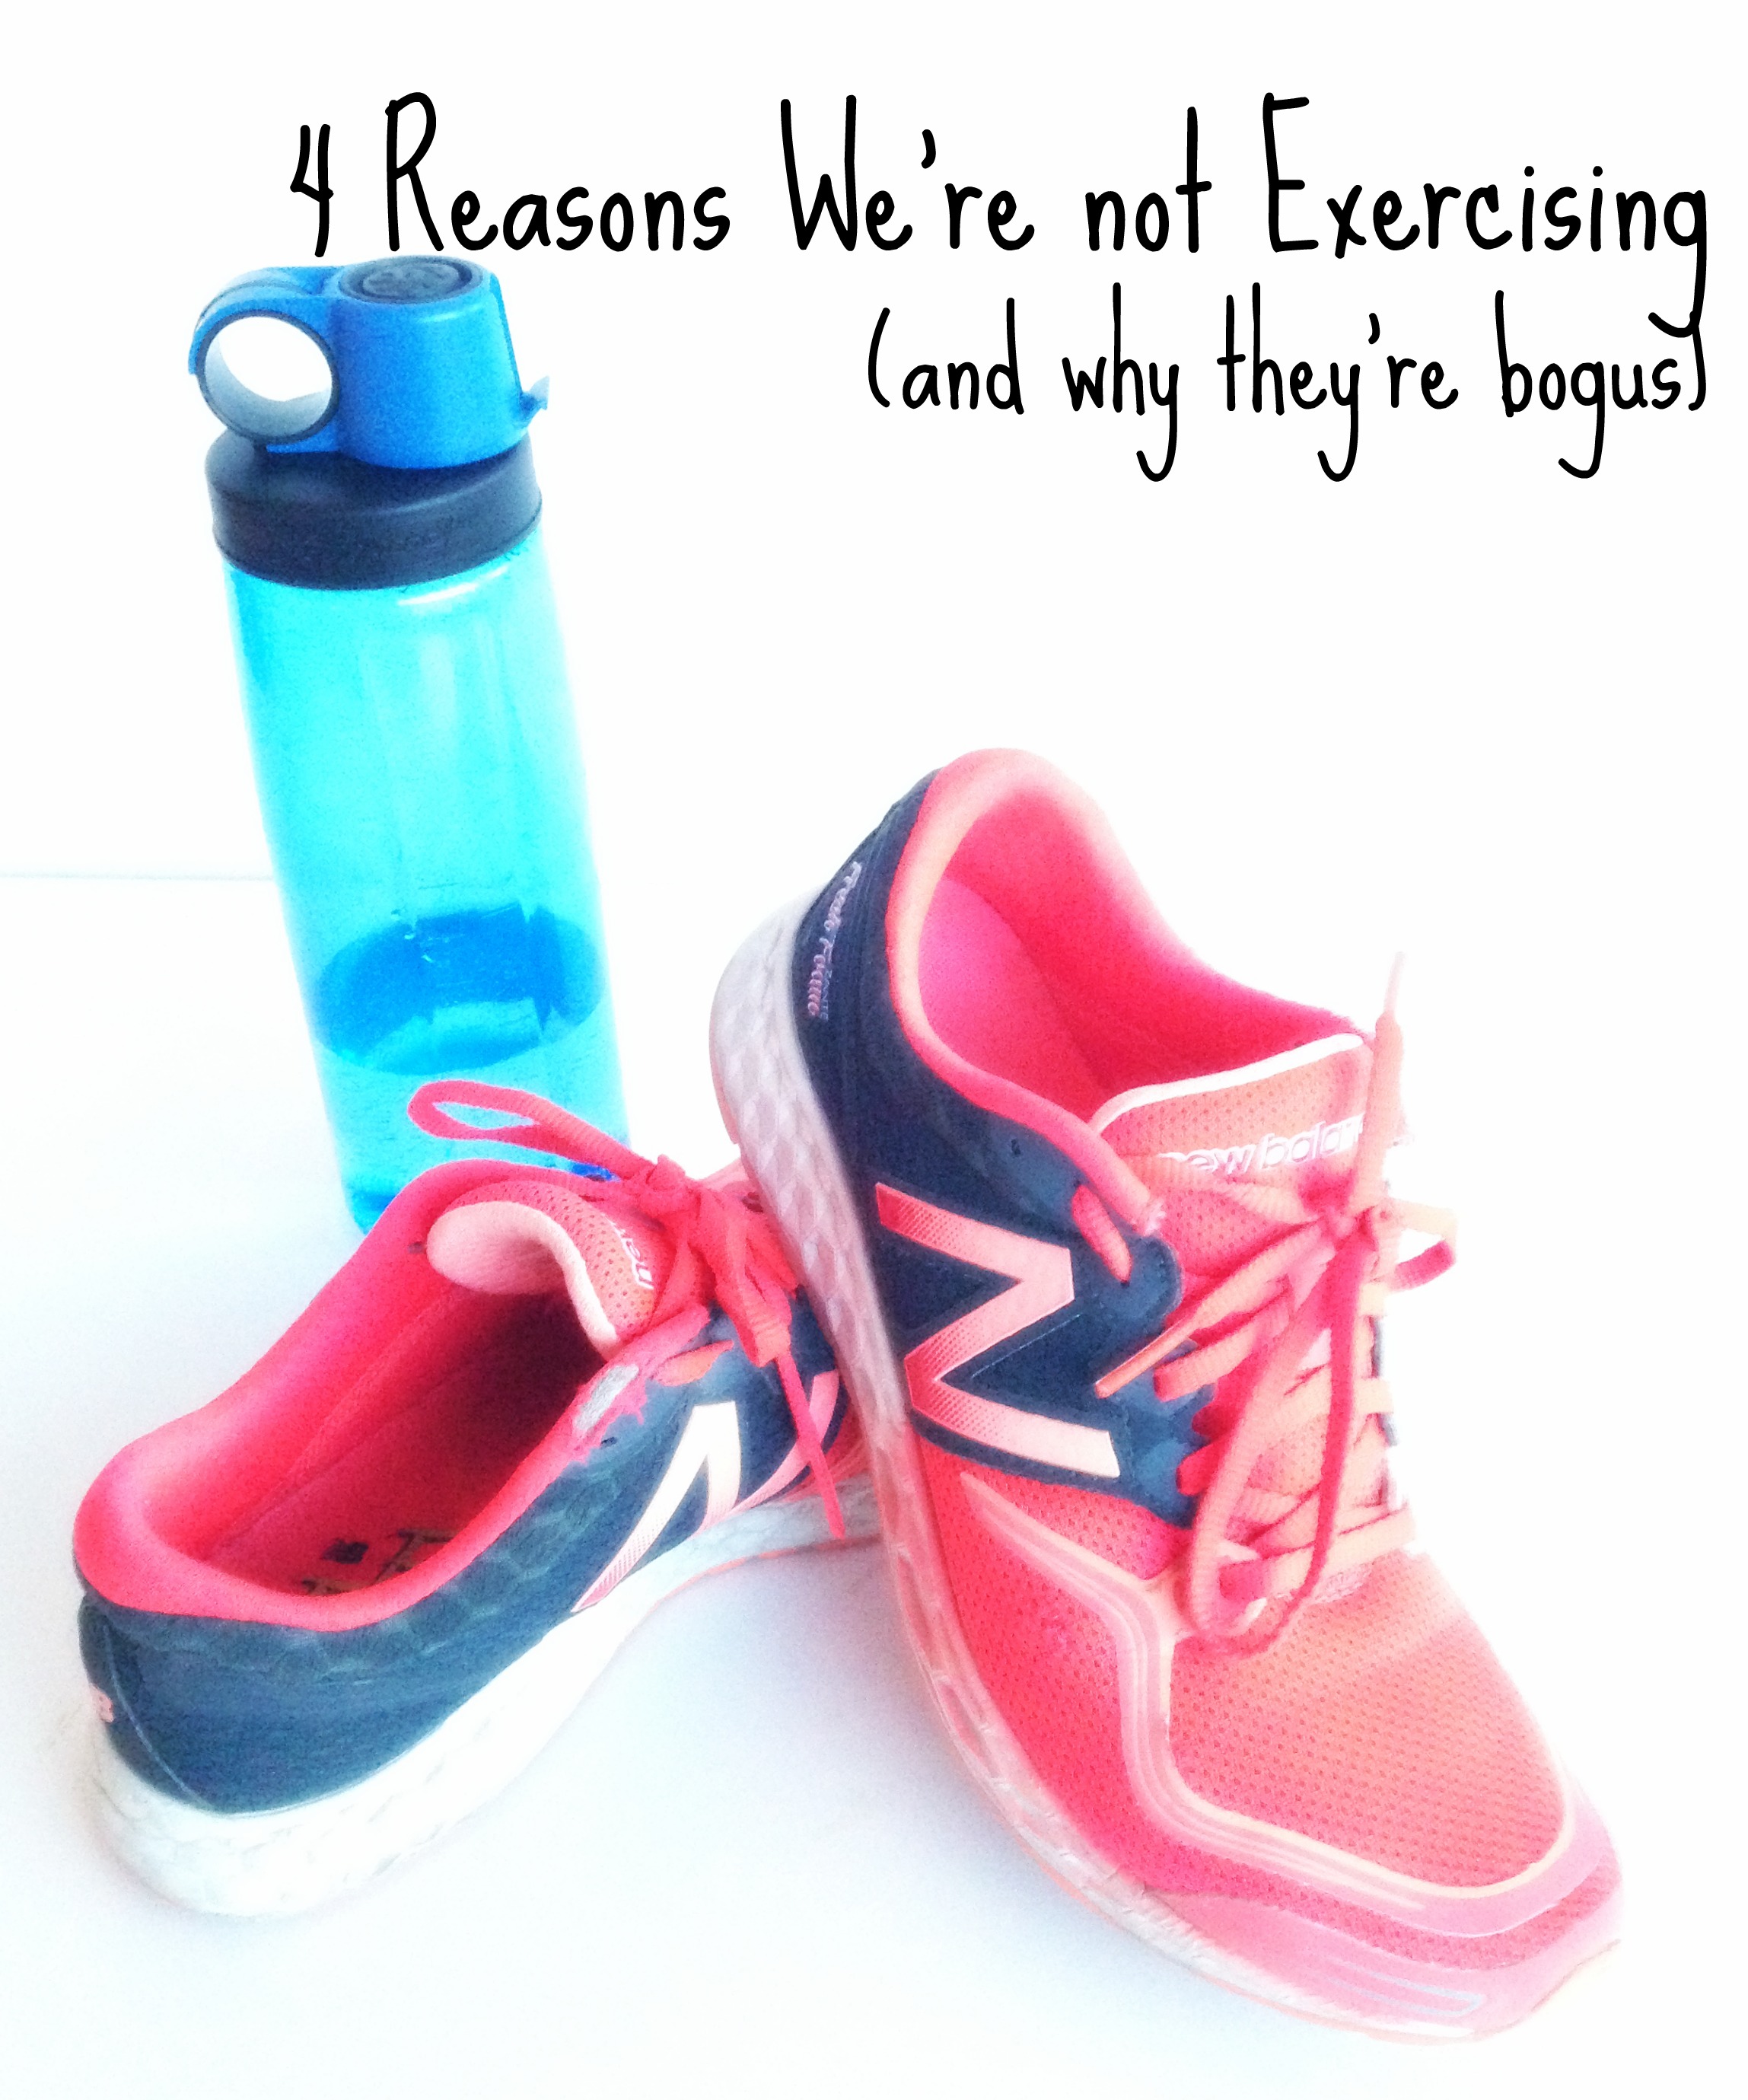 4 reasons we don't exercise and how to exercise more